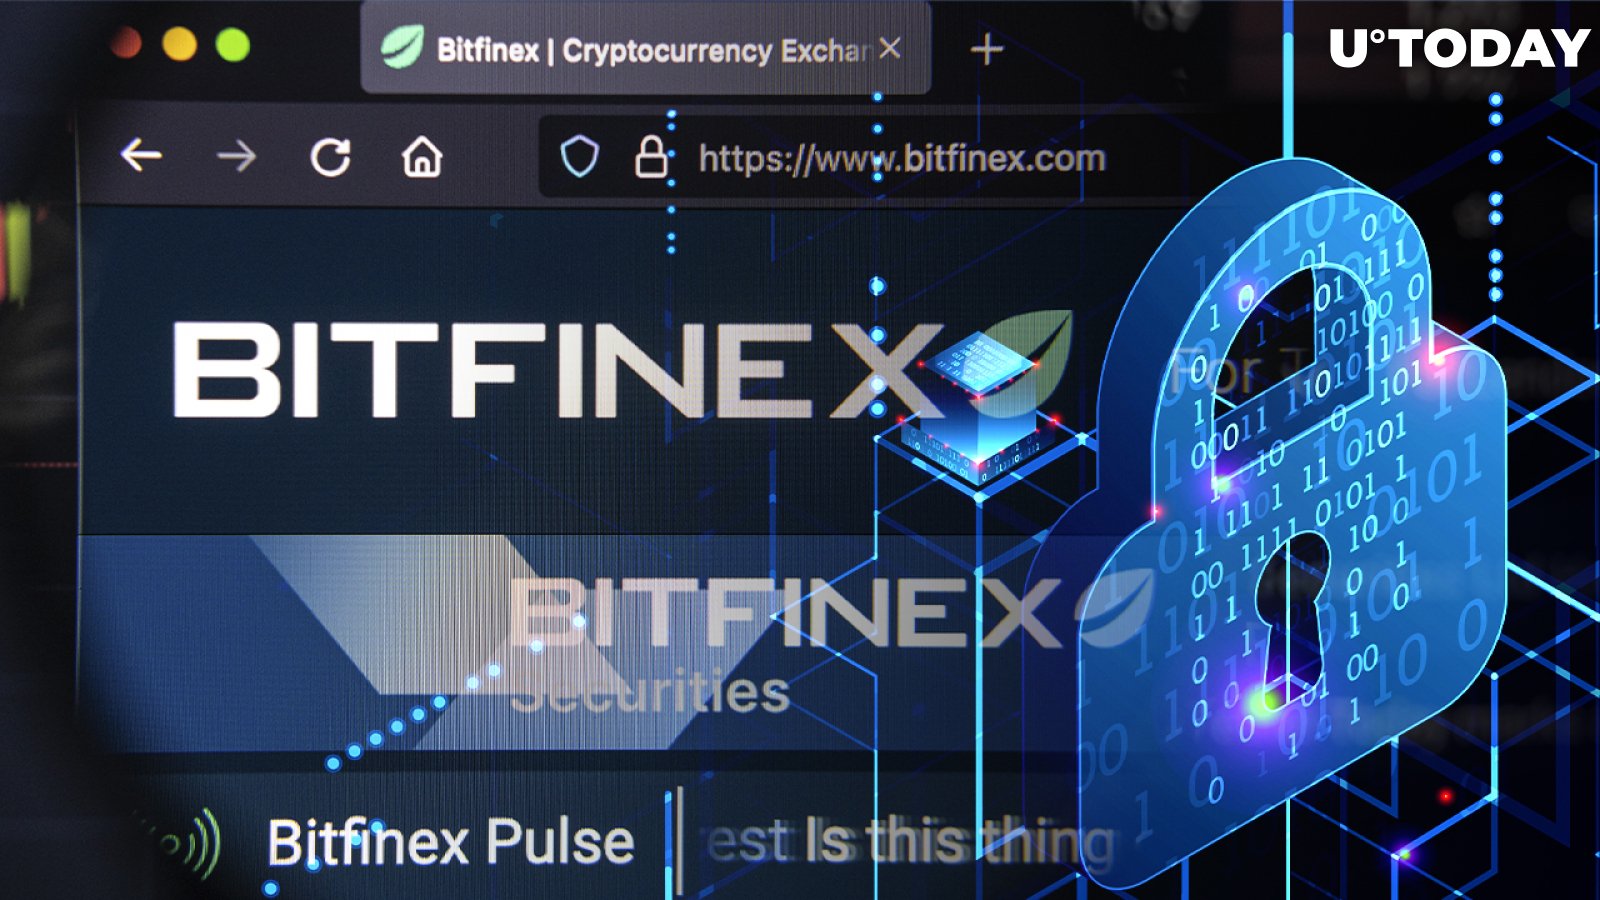 Part of Almost 130,000 BTC Stolen in 2016 Bitfinex Hack Just Transferred to Anonymous Wallet